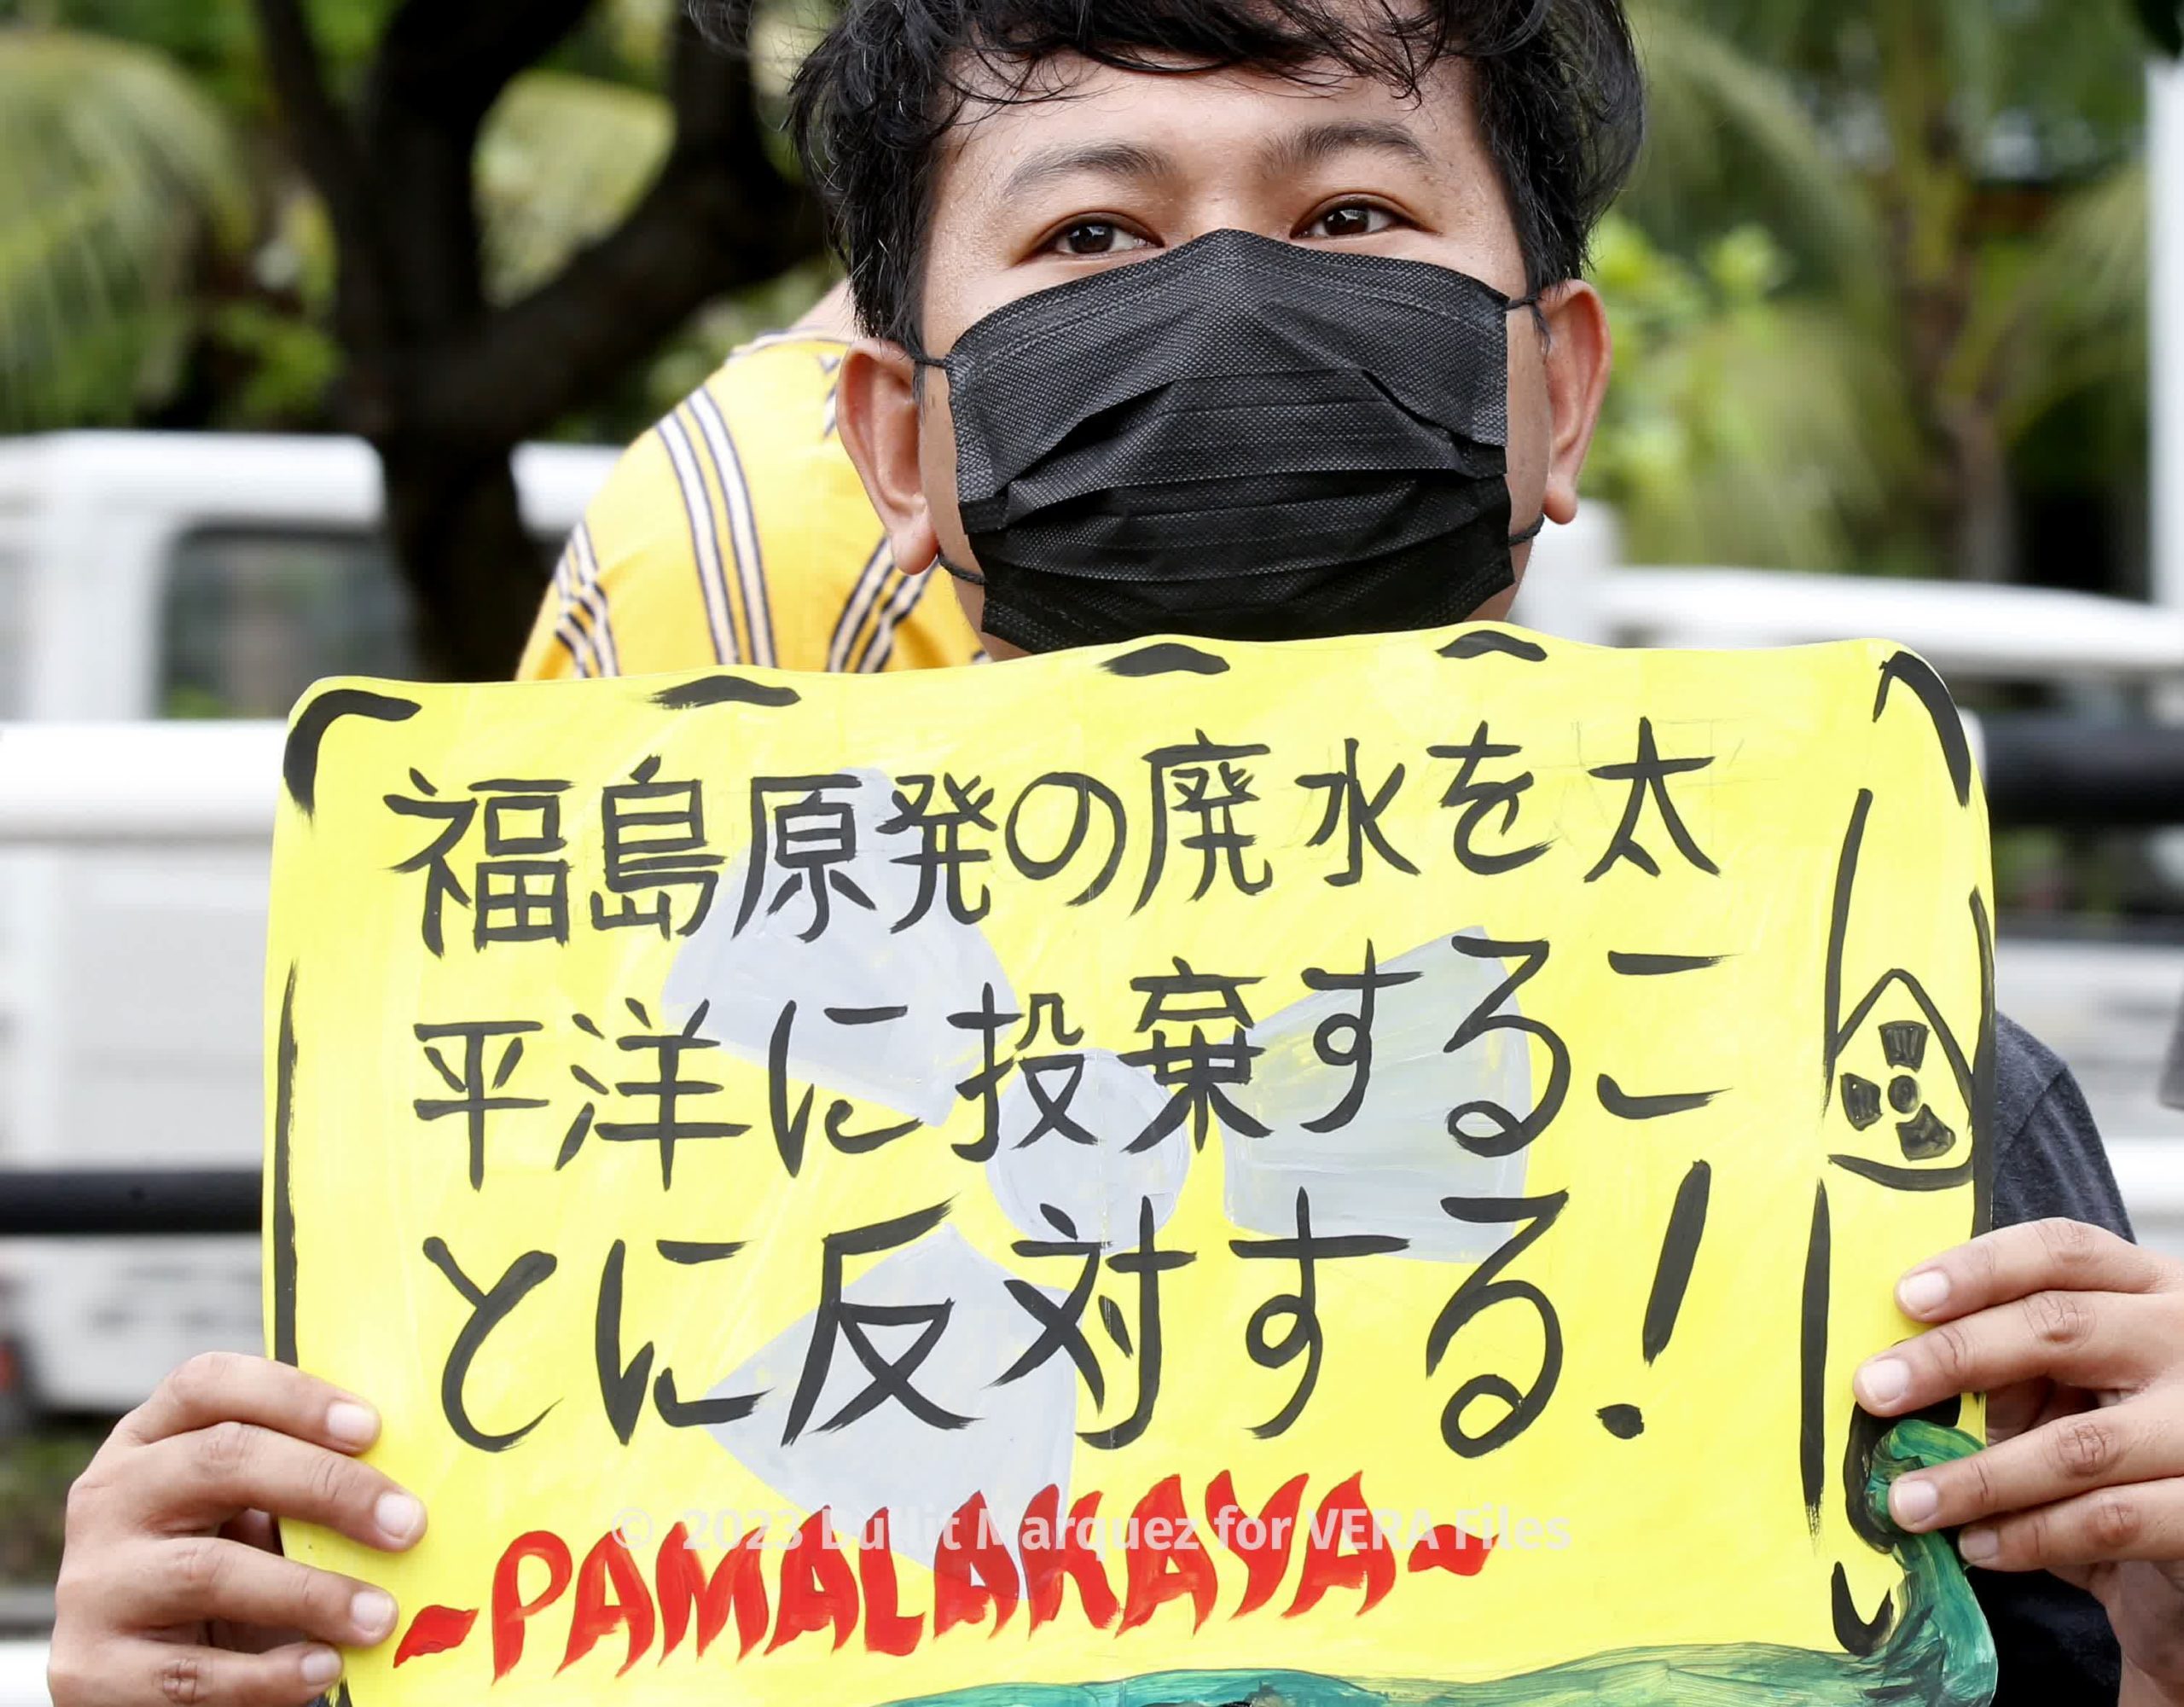 ‘No to Fukushima nuclear waste water’- protesters 1/5, Photo by Bullit Marquez for VERA Files